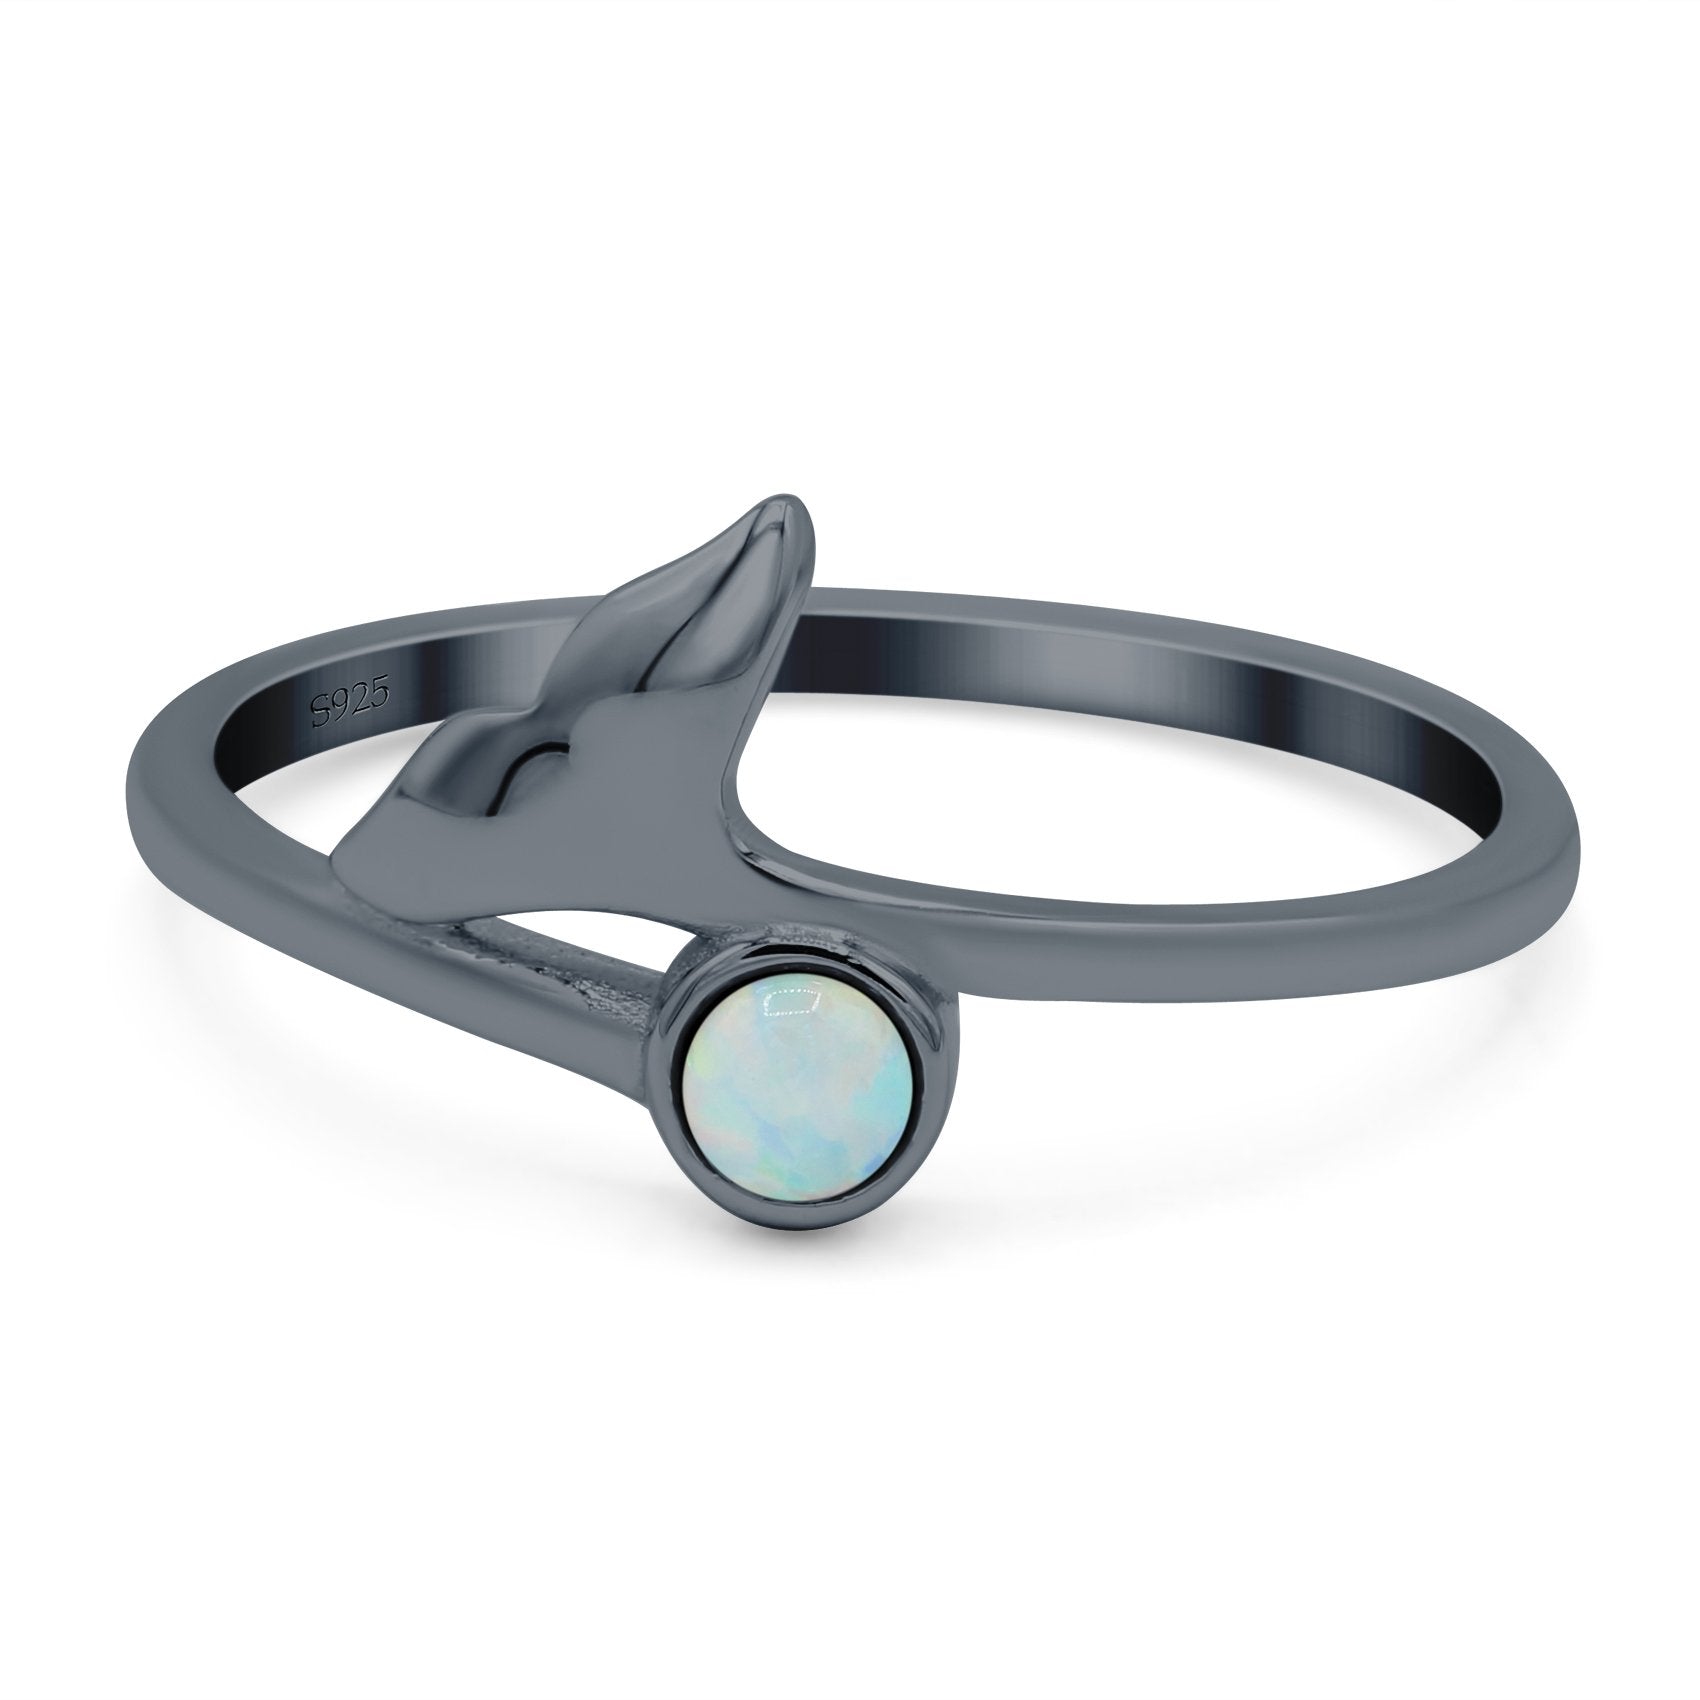 Whale Tail Ring Band Lab Created Opal 925 Sterling Silver (9mm)